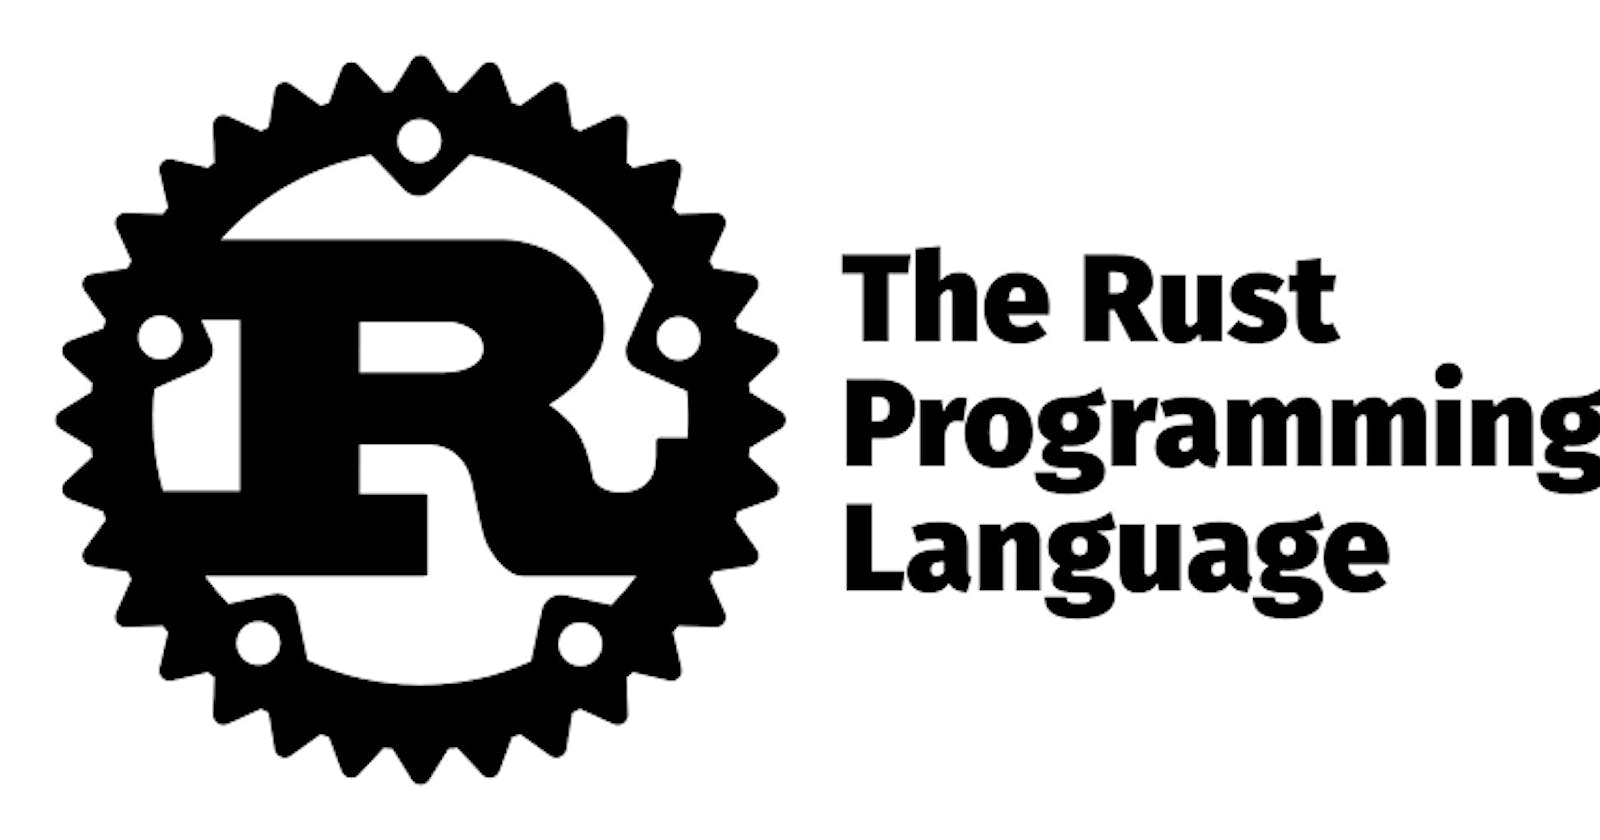 Getting started with Rust